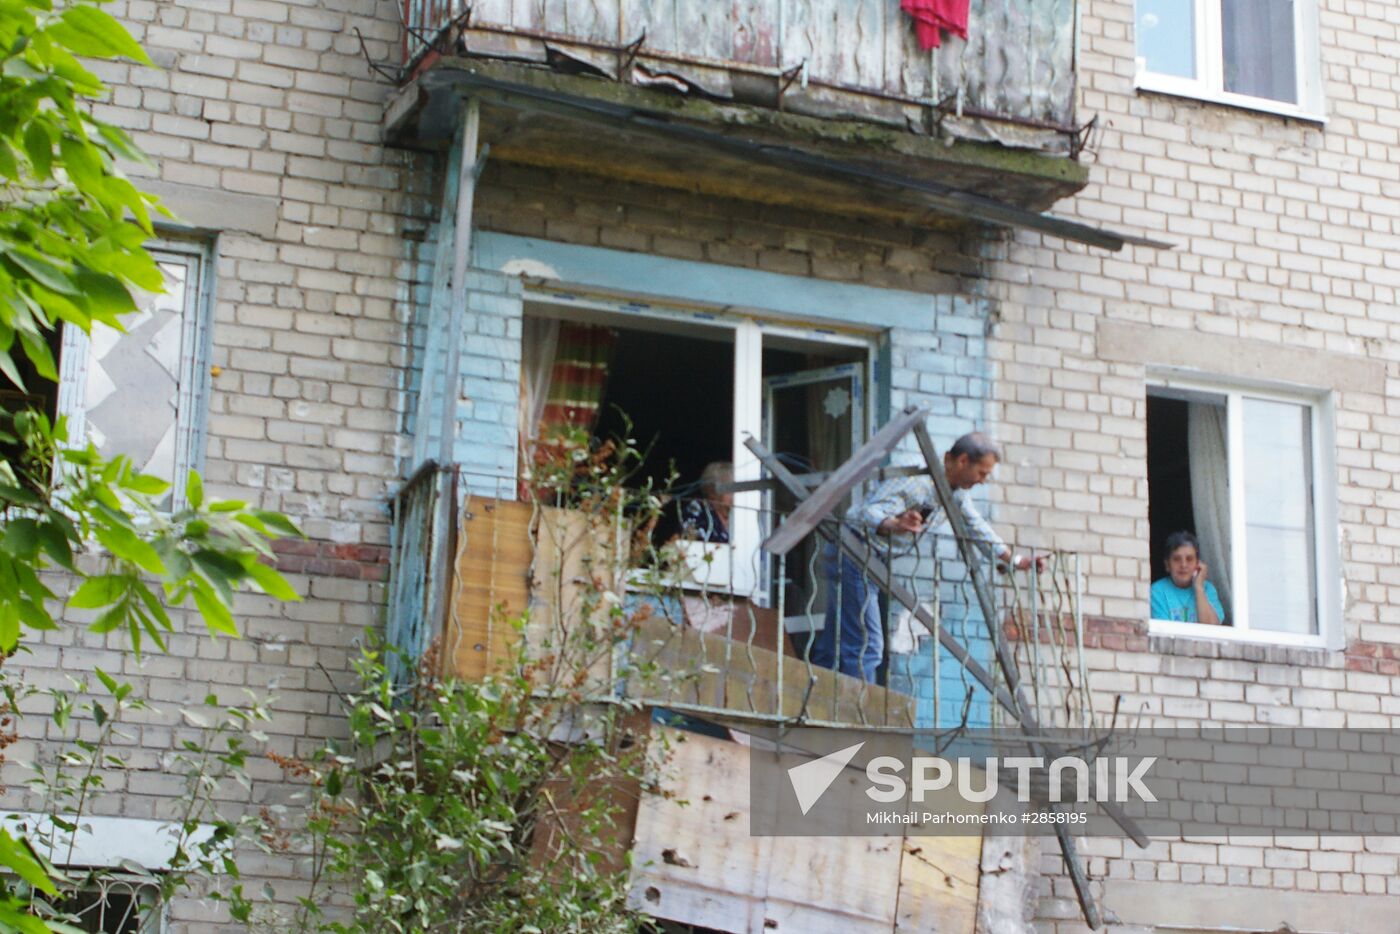 Consequences of bombardment of residential house in Donetsk